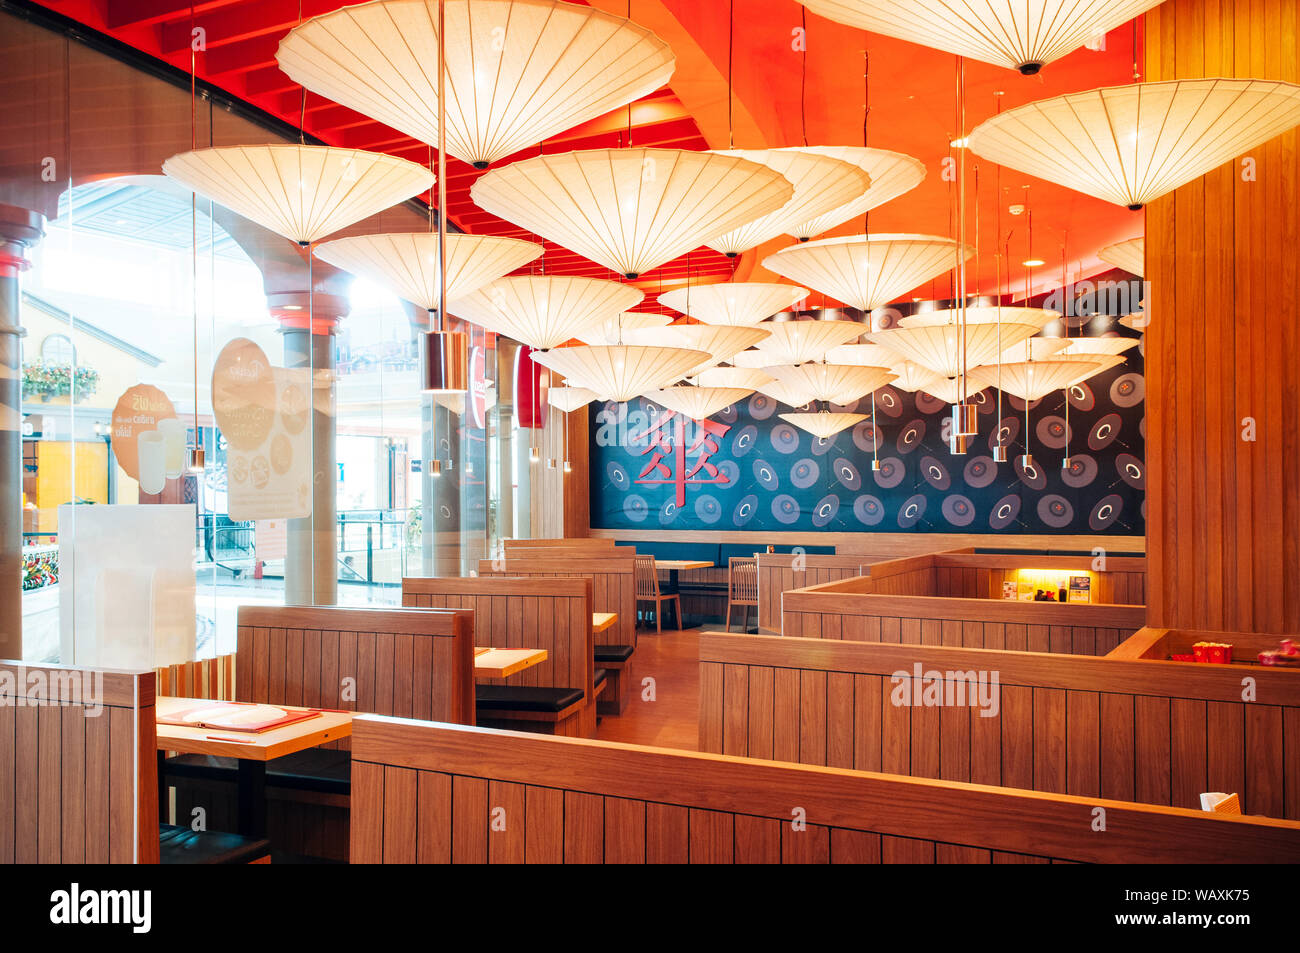 OCT 30, 2013 Bangkok, THAILAND - Vibrant Japanese restaurant interior,  decorated ceiling with paper umbrellas, warm tone lighting and wooden  furniture Stock Photo - Alamy